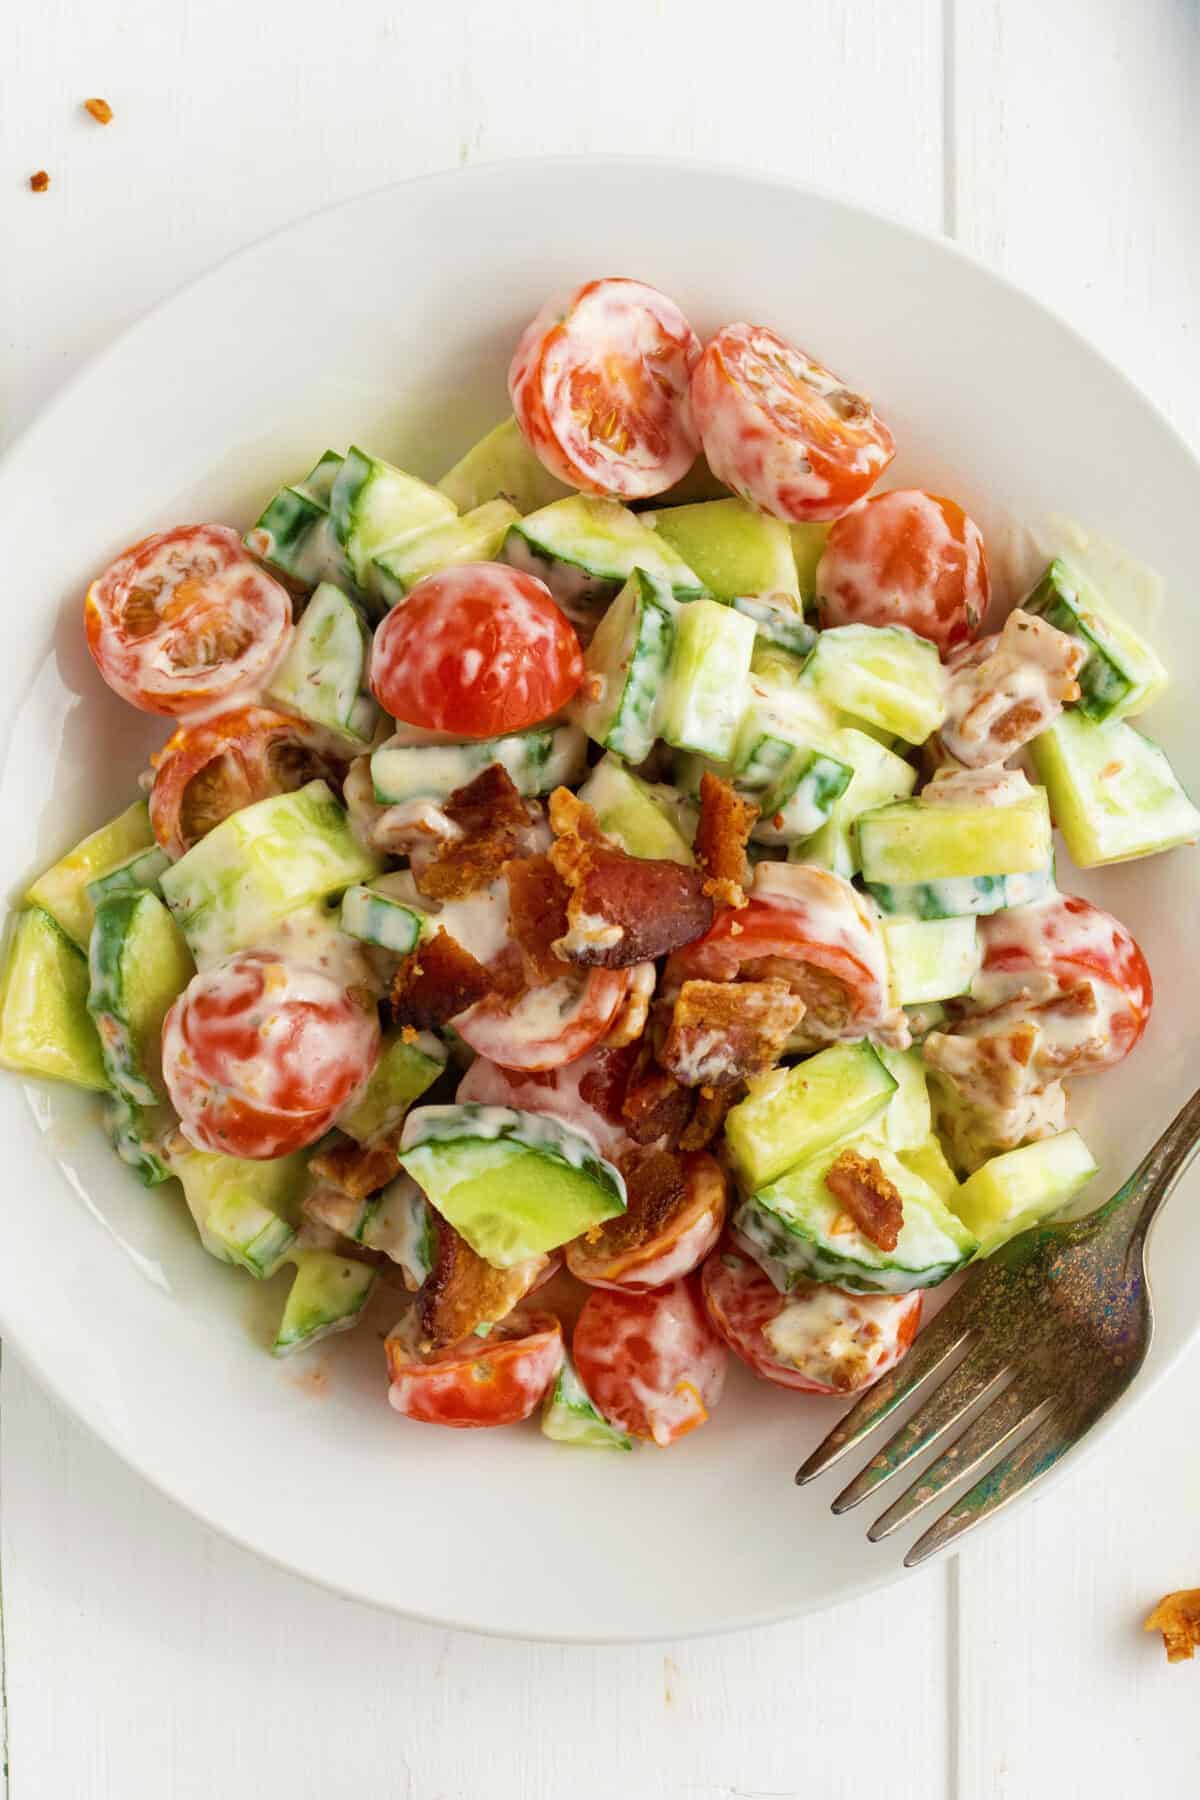 Cucumber tomato salad with bacon on top